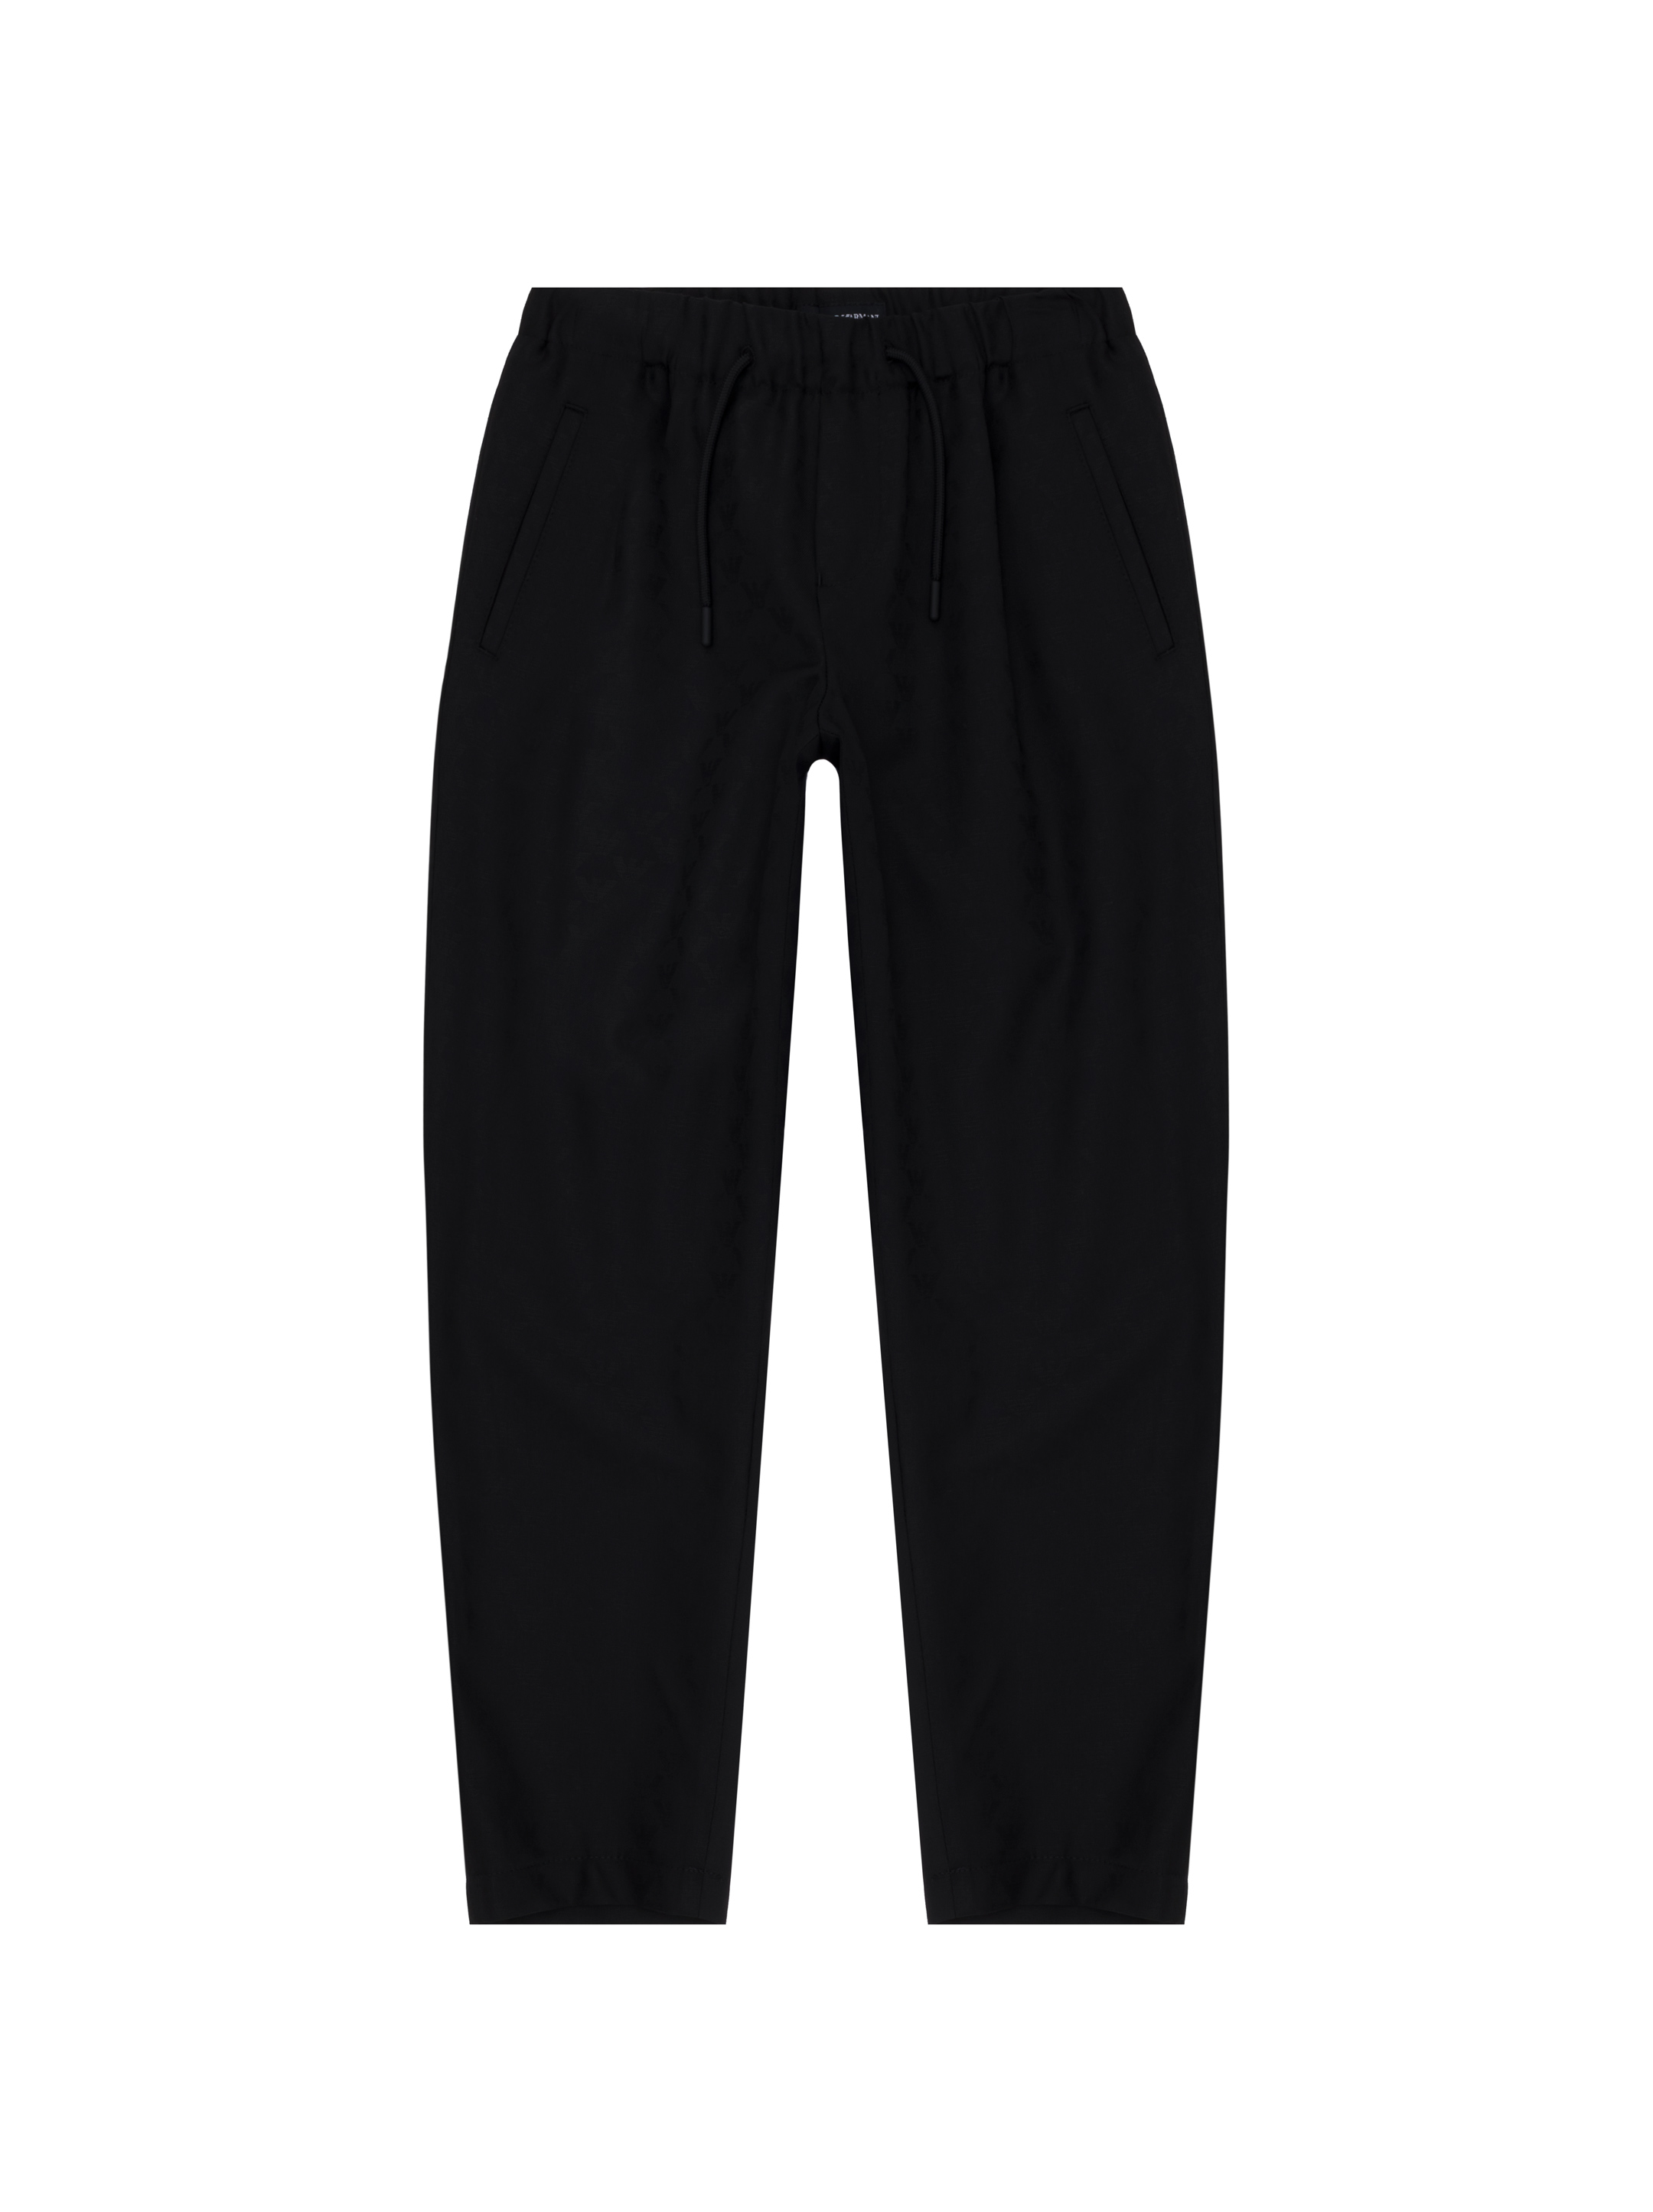 EMPORIO ARMANI kids' Sport pants with monogram - buy for 228200 KZT in the  official Viled online store, art. 3R4PG5 